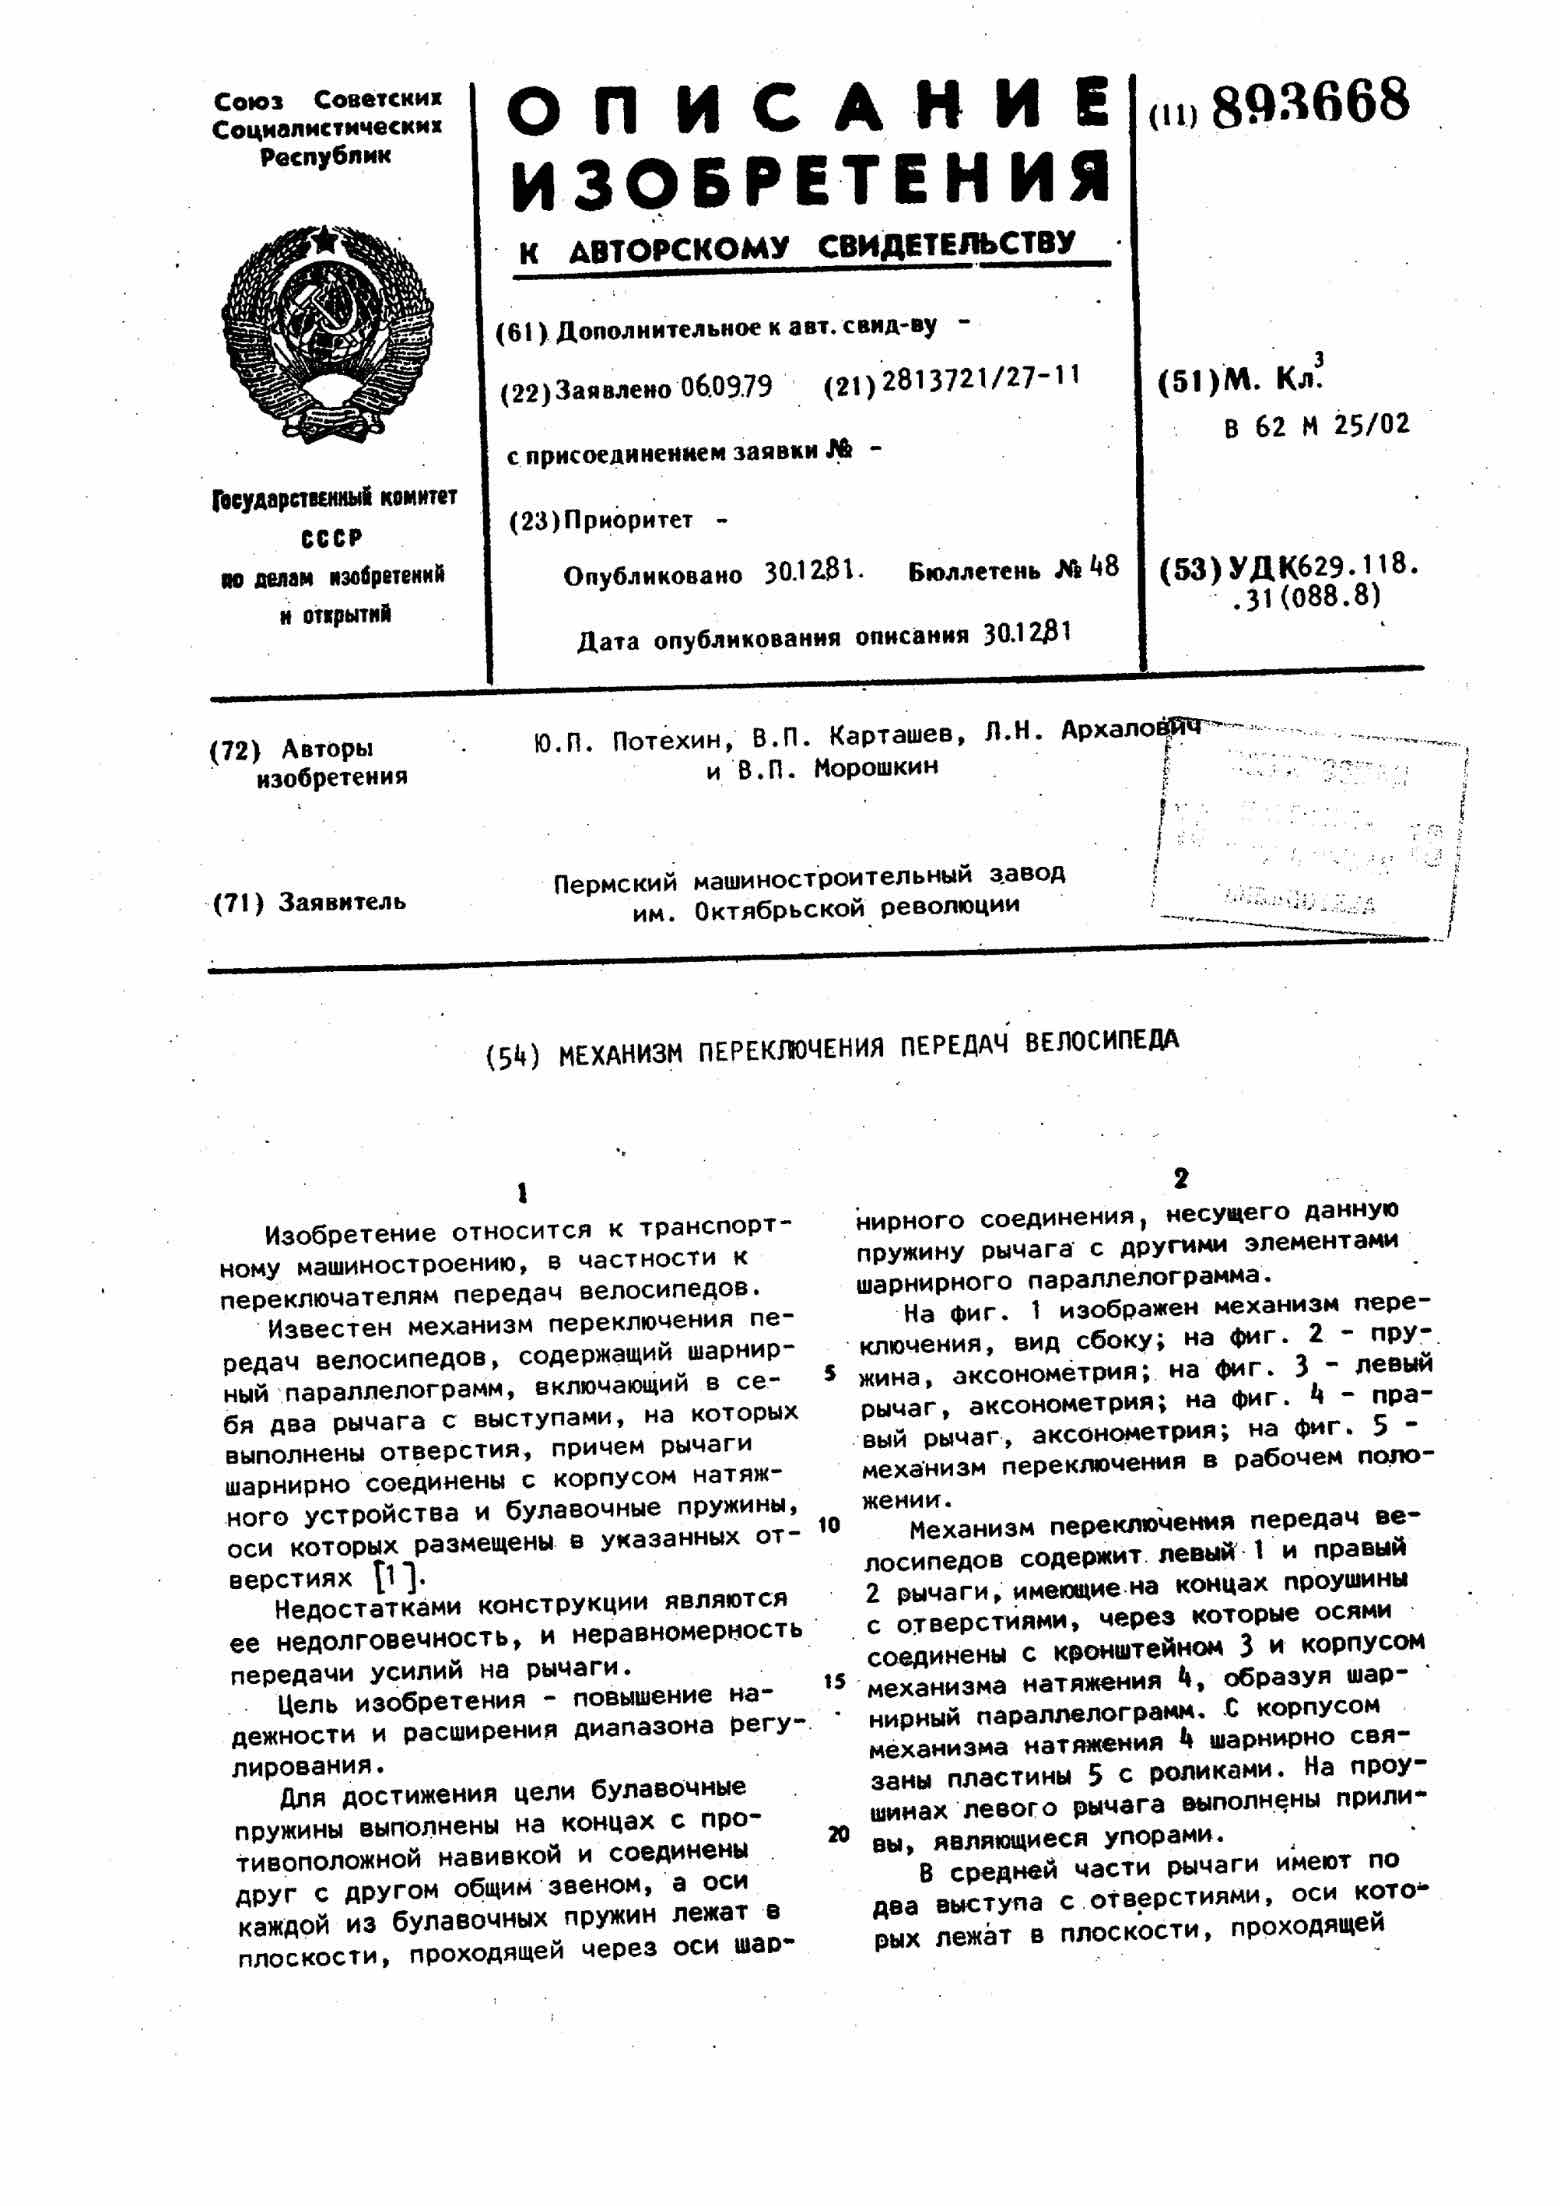 USSR Patent 893,668 - Perm scan 1 main image